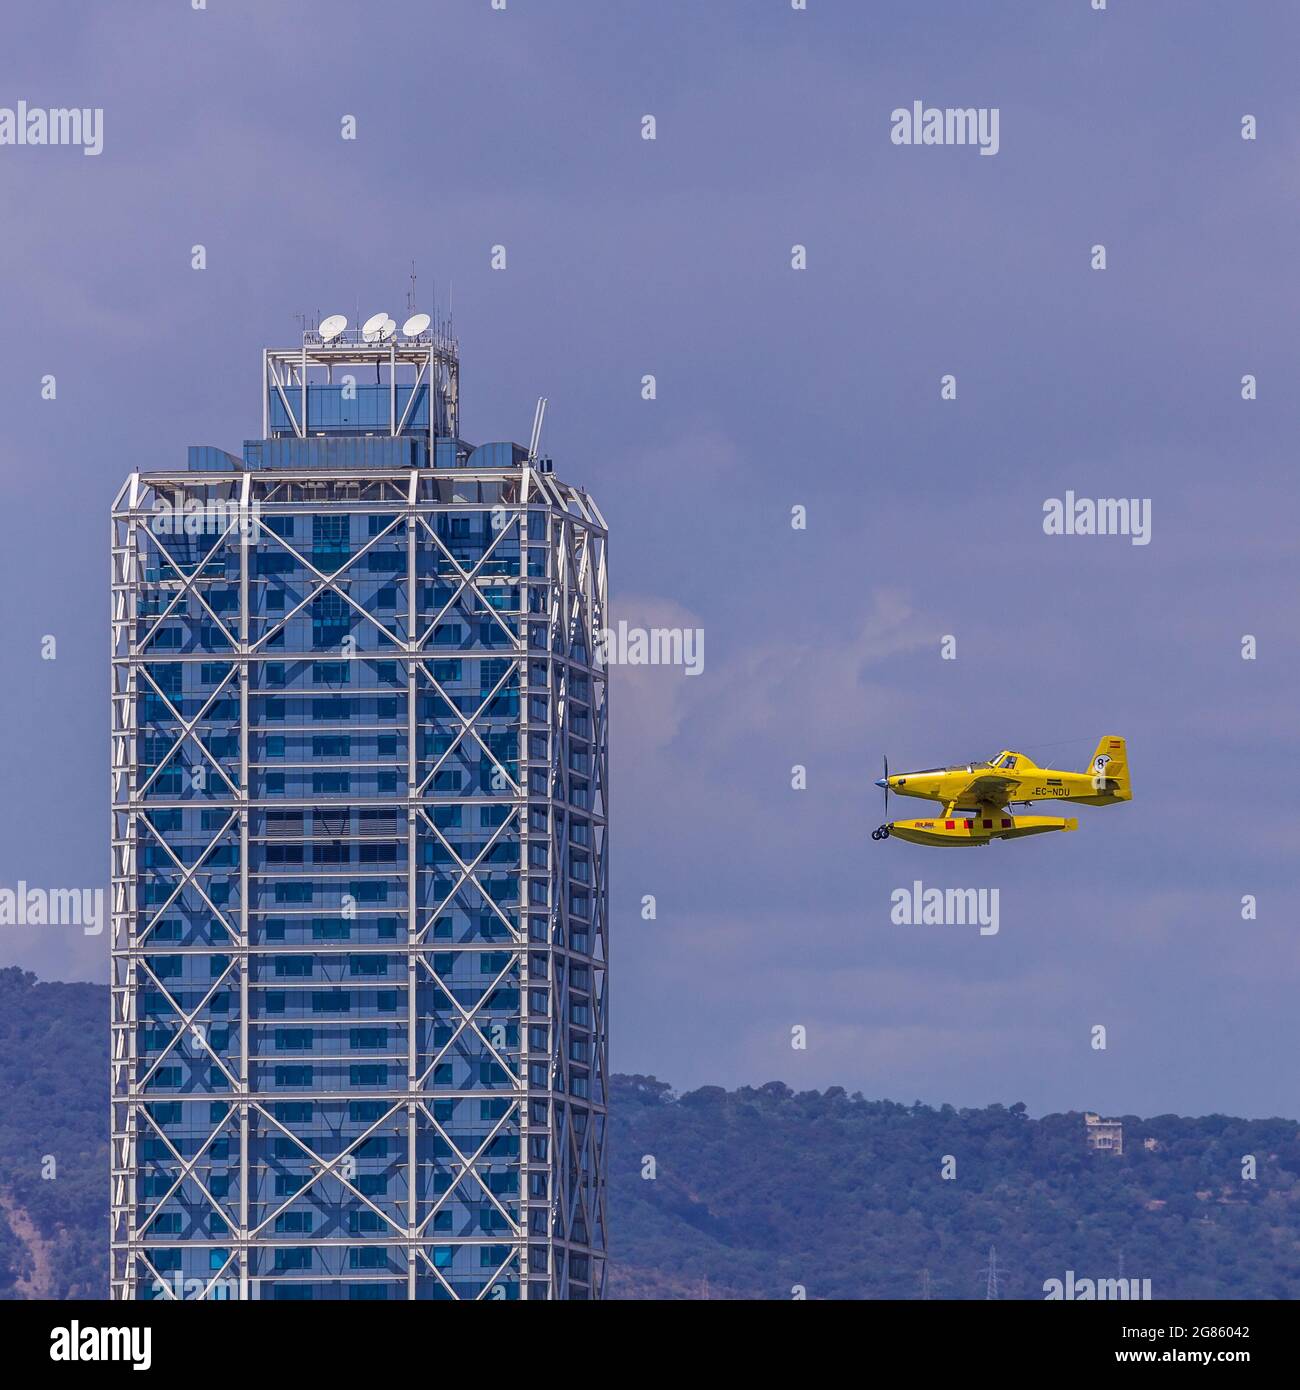 Yellow plane flying under a building Barcelona, July 17, 2021 Stock Photo